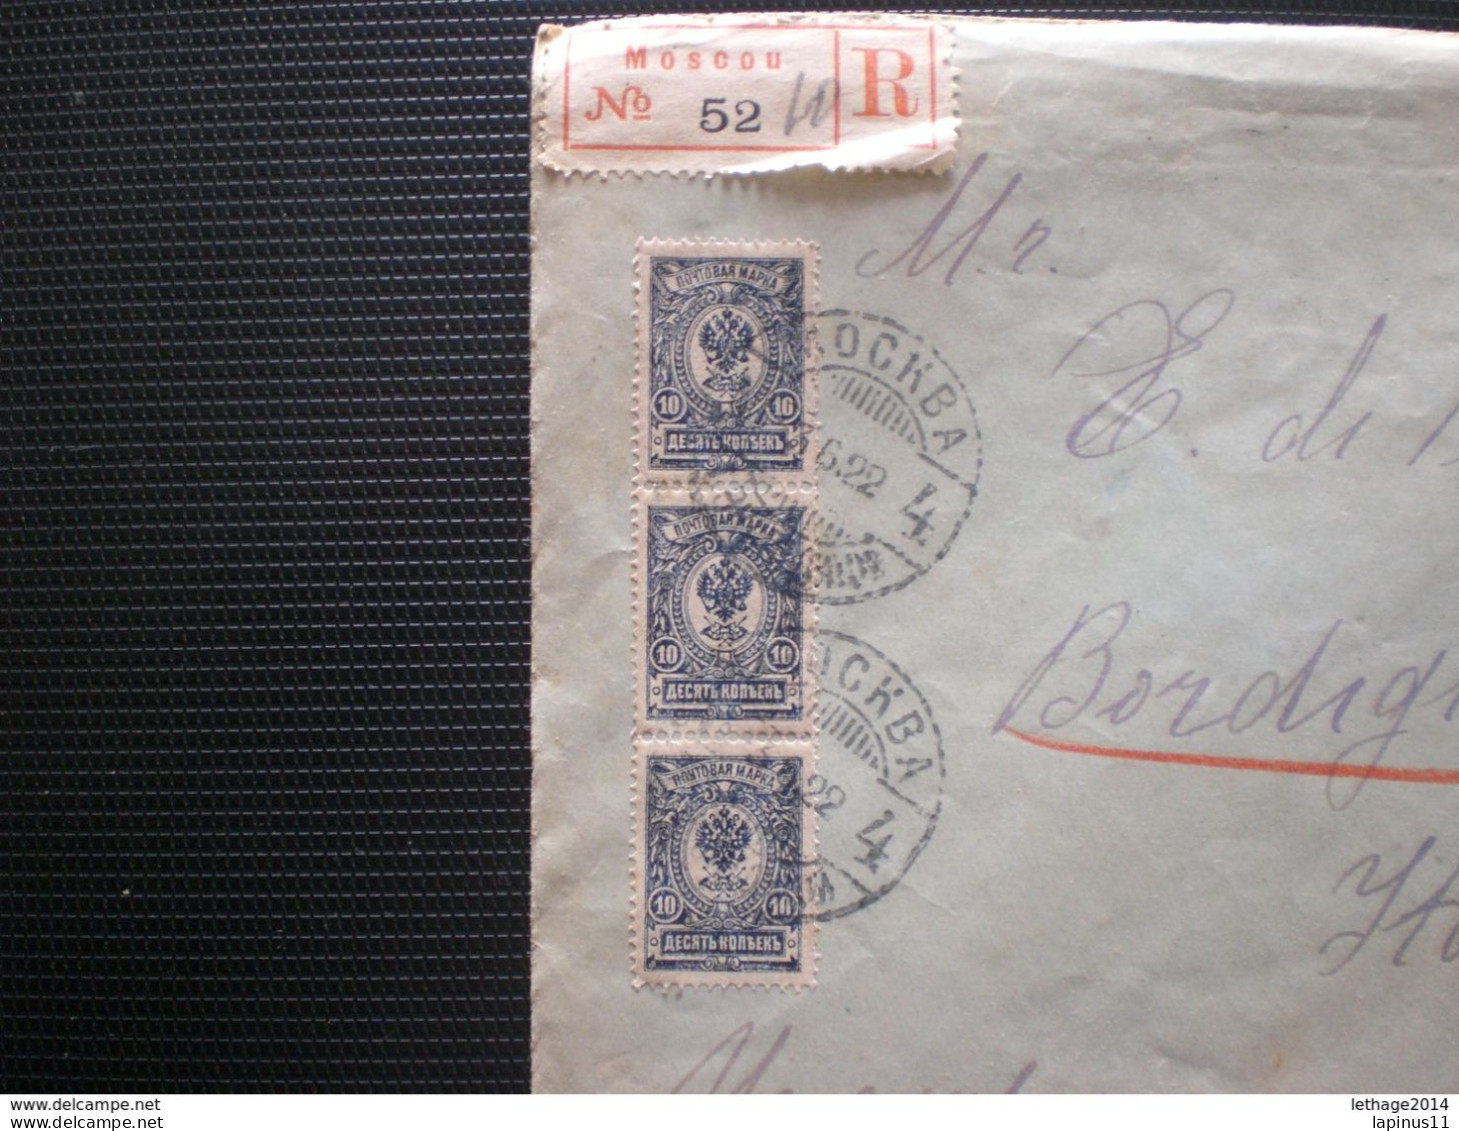 RUSSIA RUSSIE РОССИЯ STAMPS COVER 1922 REGISTER MAIL RUSSIE TO ITALY RRR RIF.TAGG. (78) - Brieven En Documenten